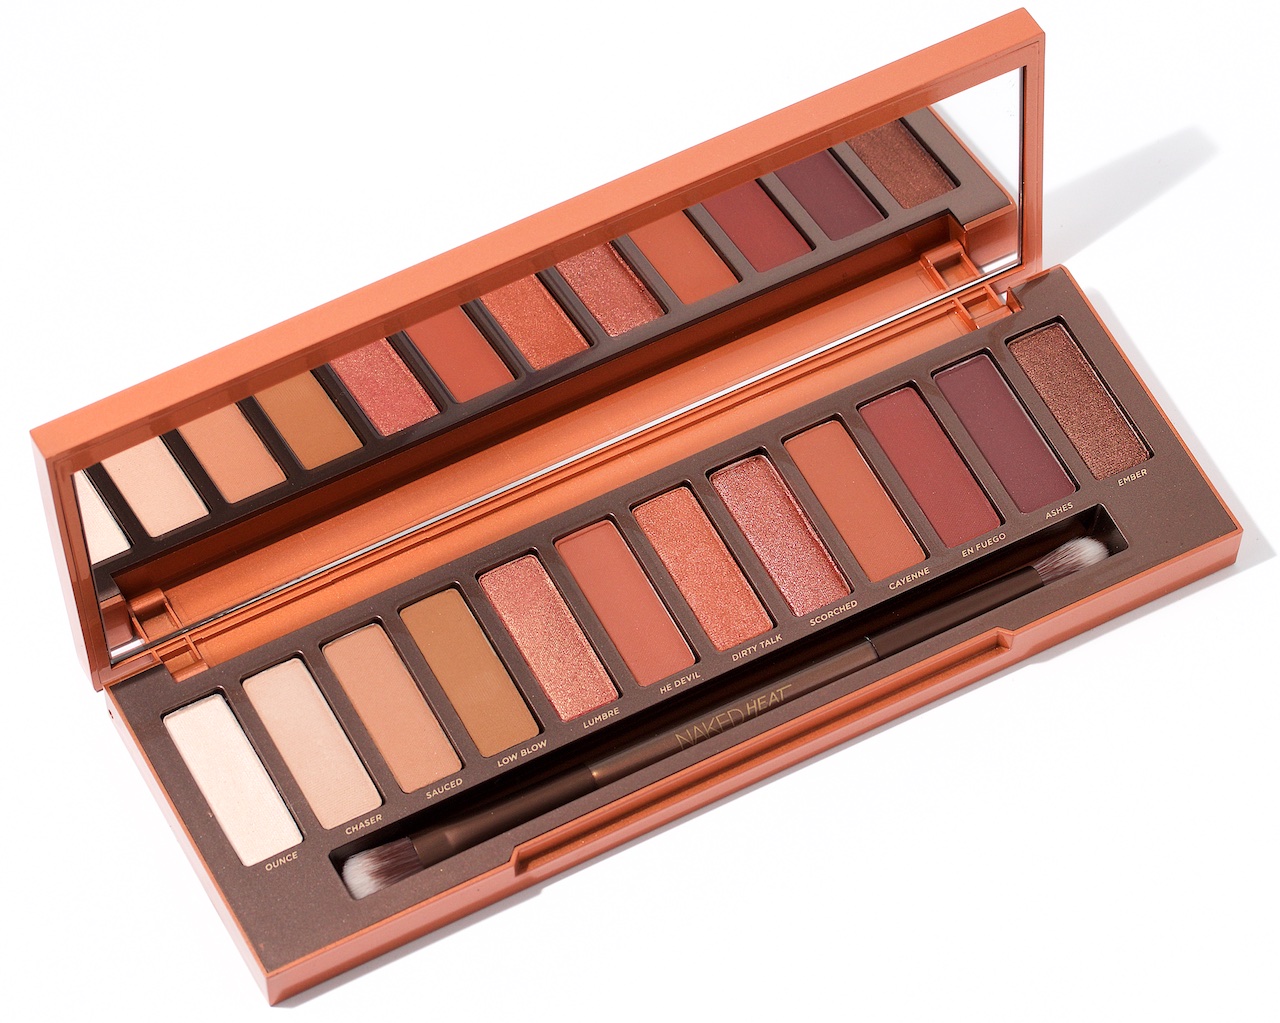 Urban Decay Naked Heat Eyeshadow Palette Review & Swatches